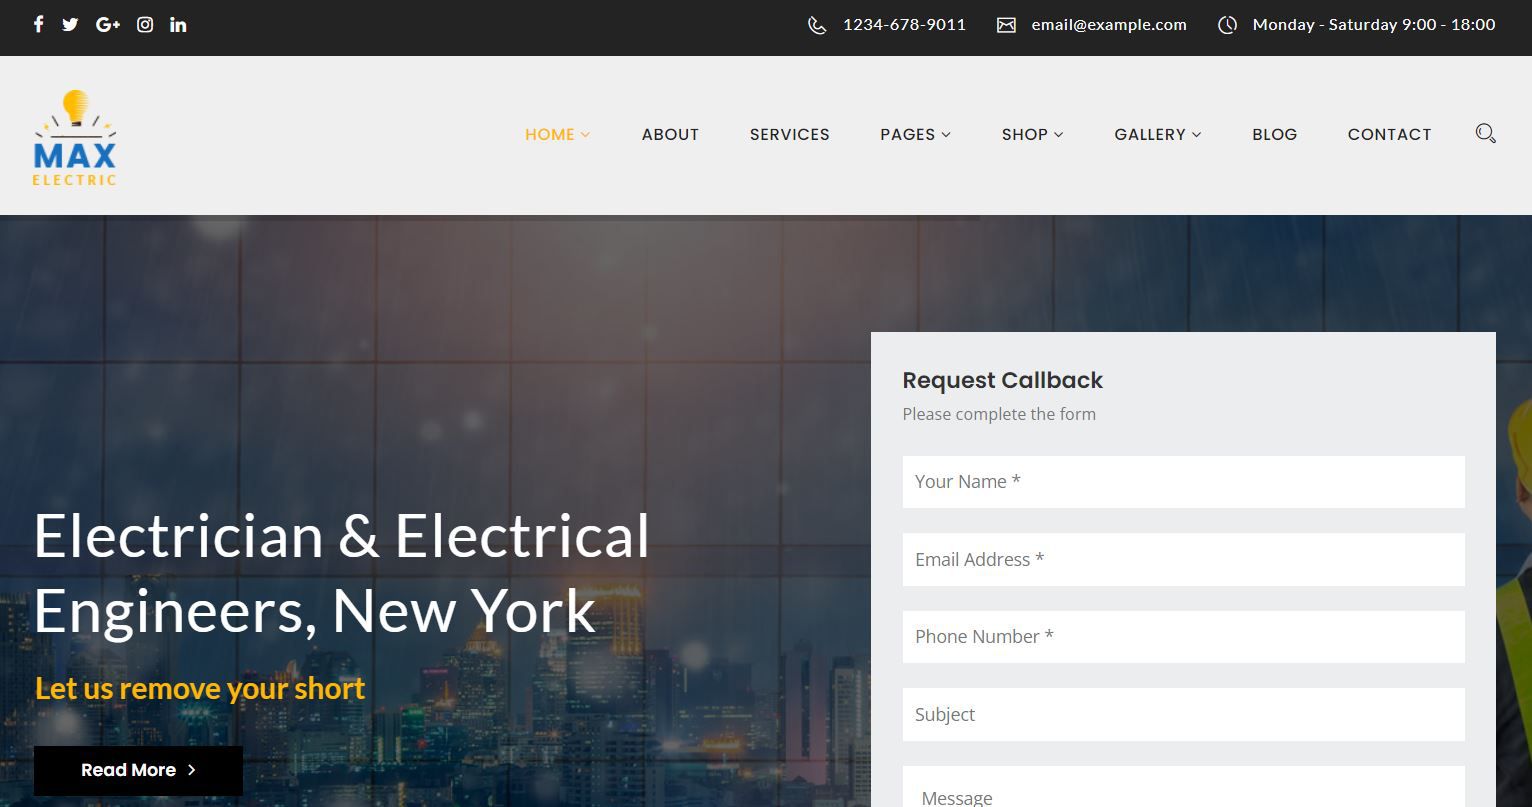 max electric thiết kế website